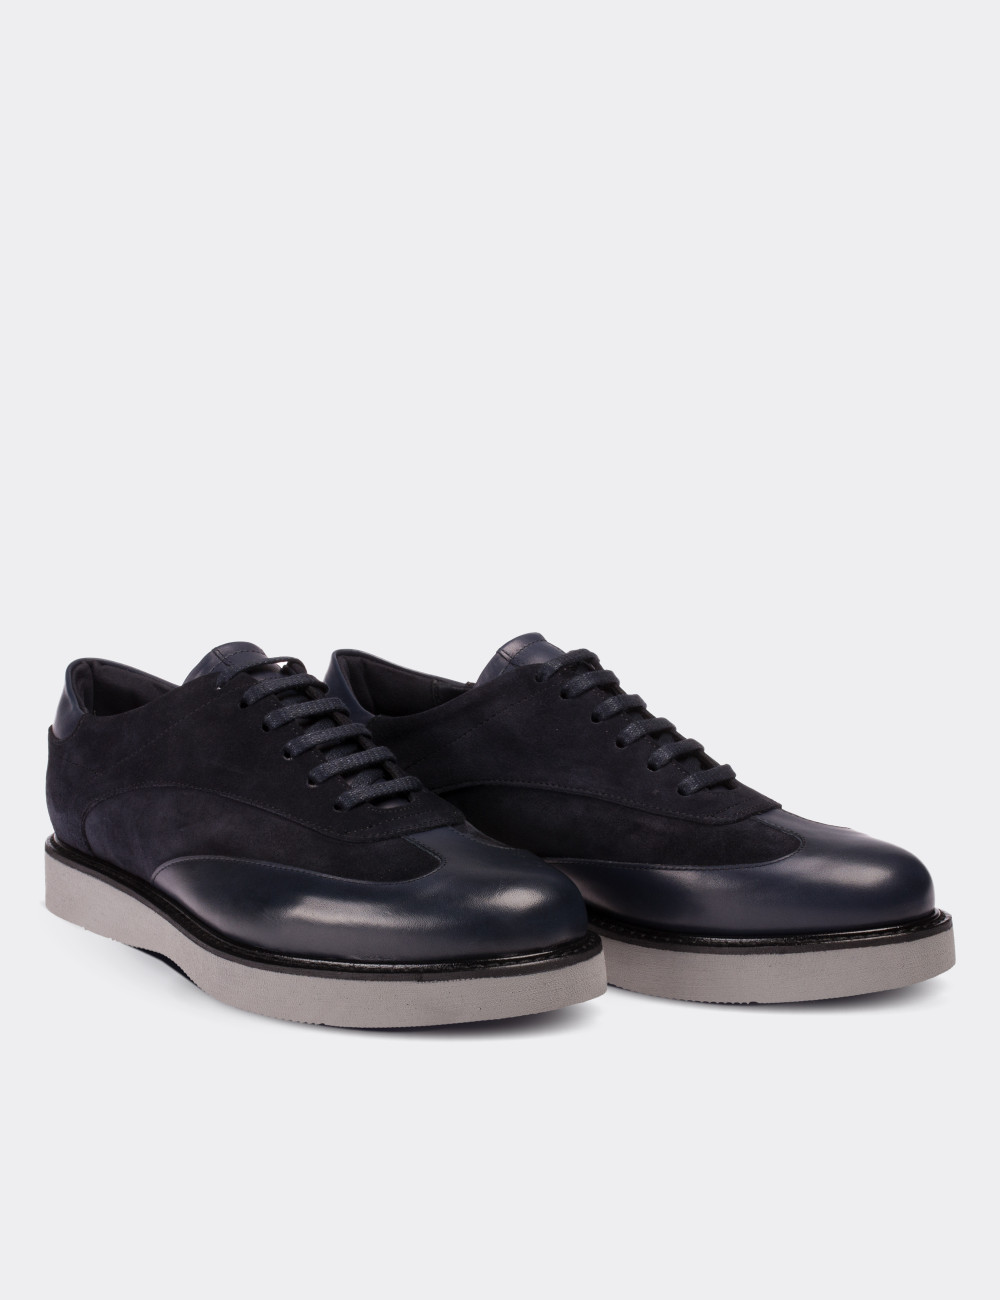 Navy Suede Leather Lace-up Shoes - 01686MLCVE01